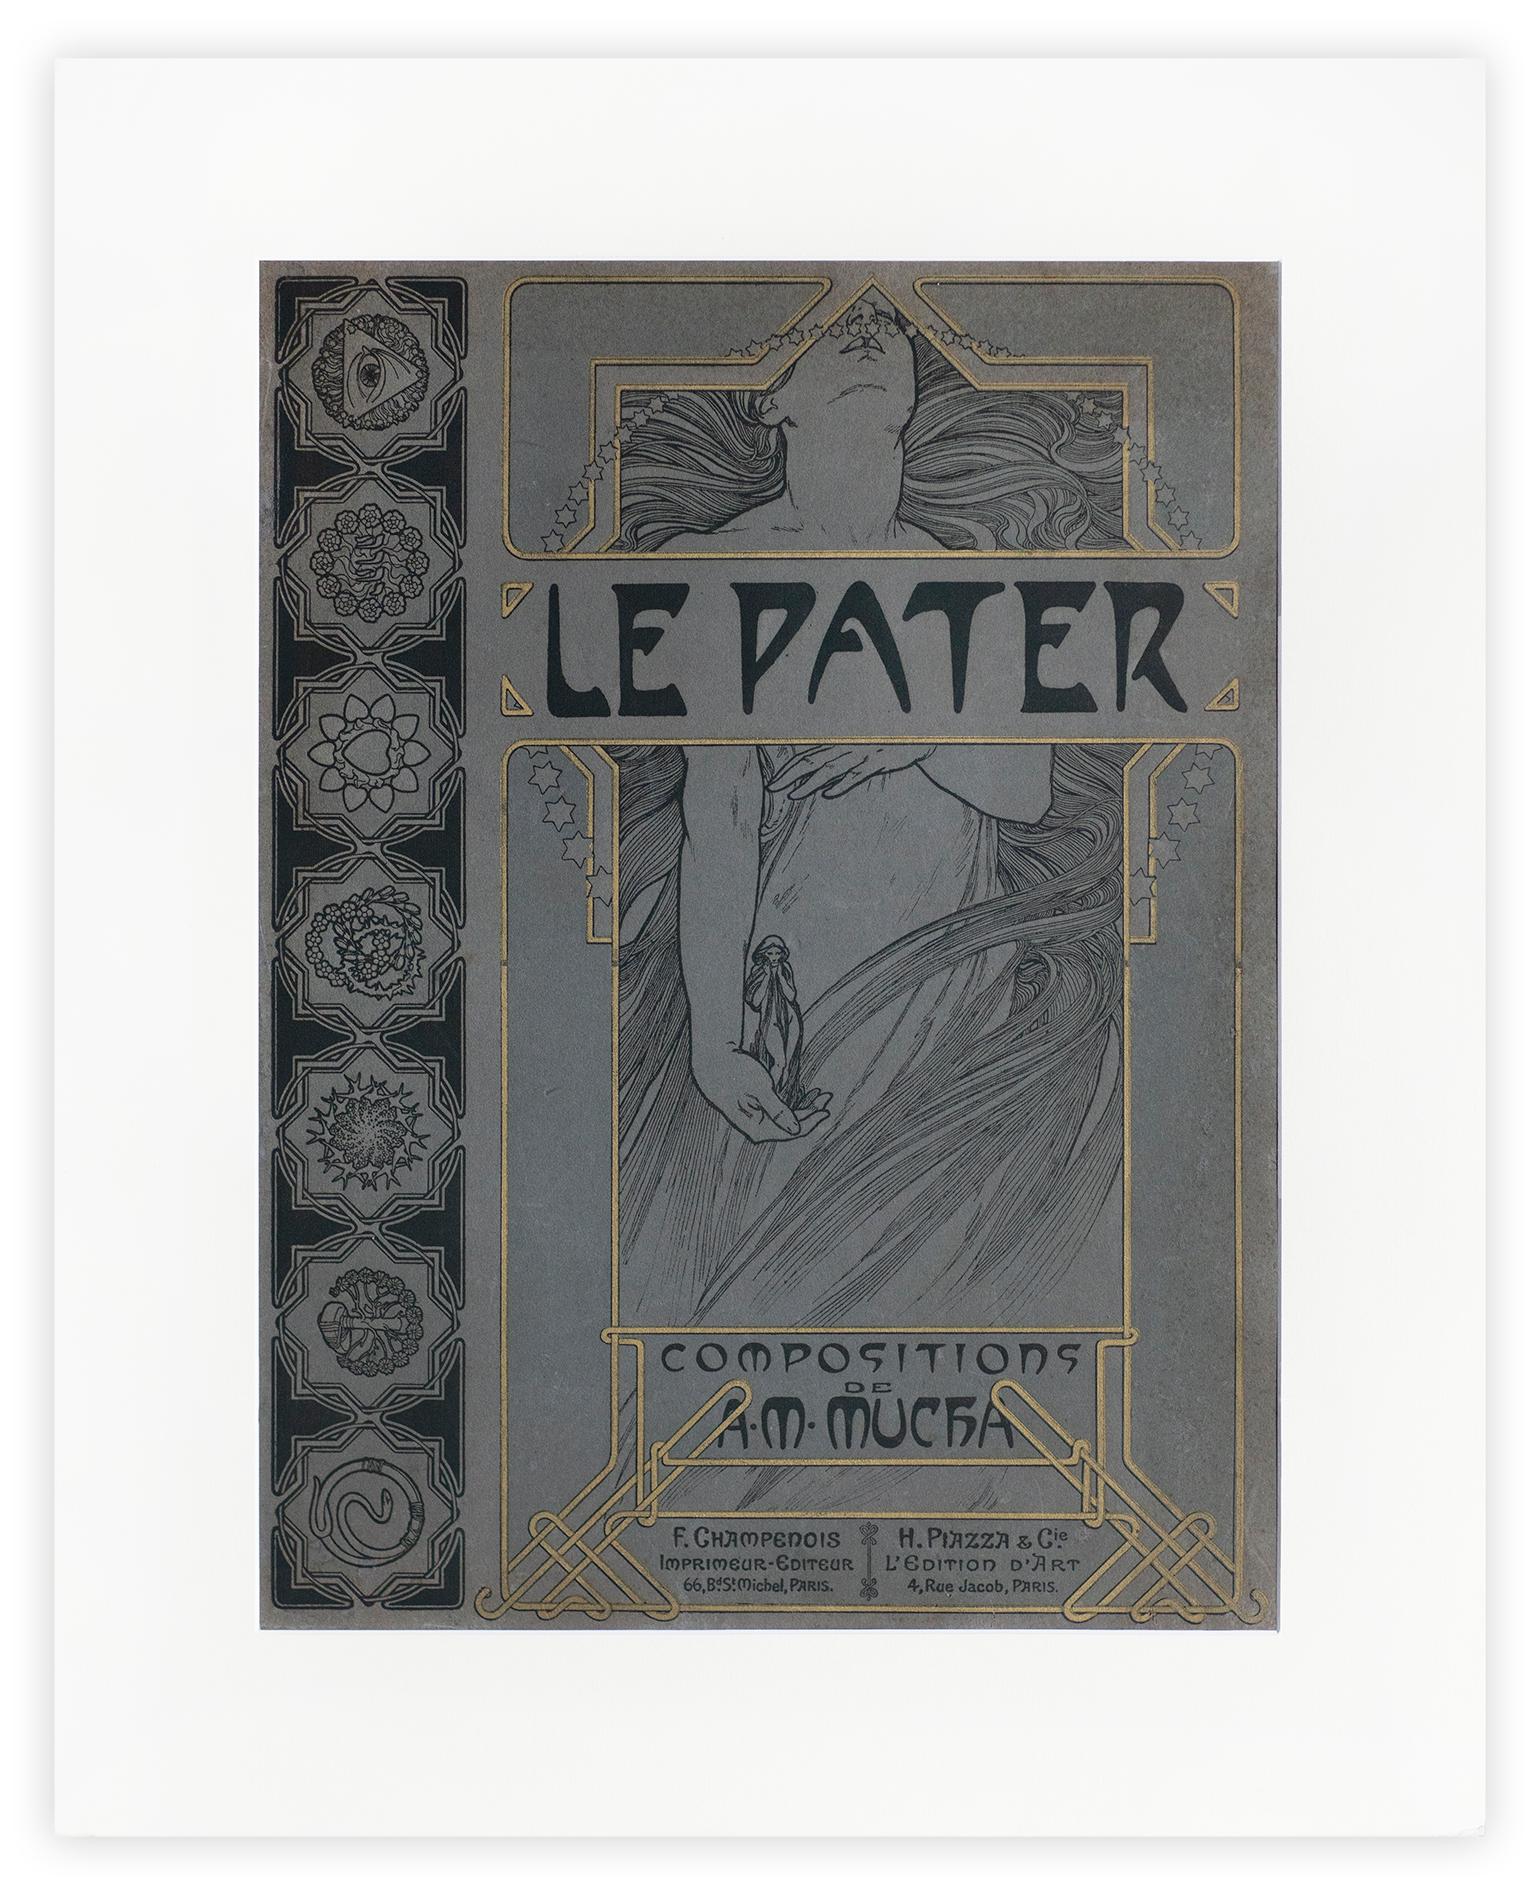 le pater alphonse mucha's symbolist masterpiece and the lineage of mysticism